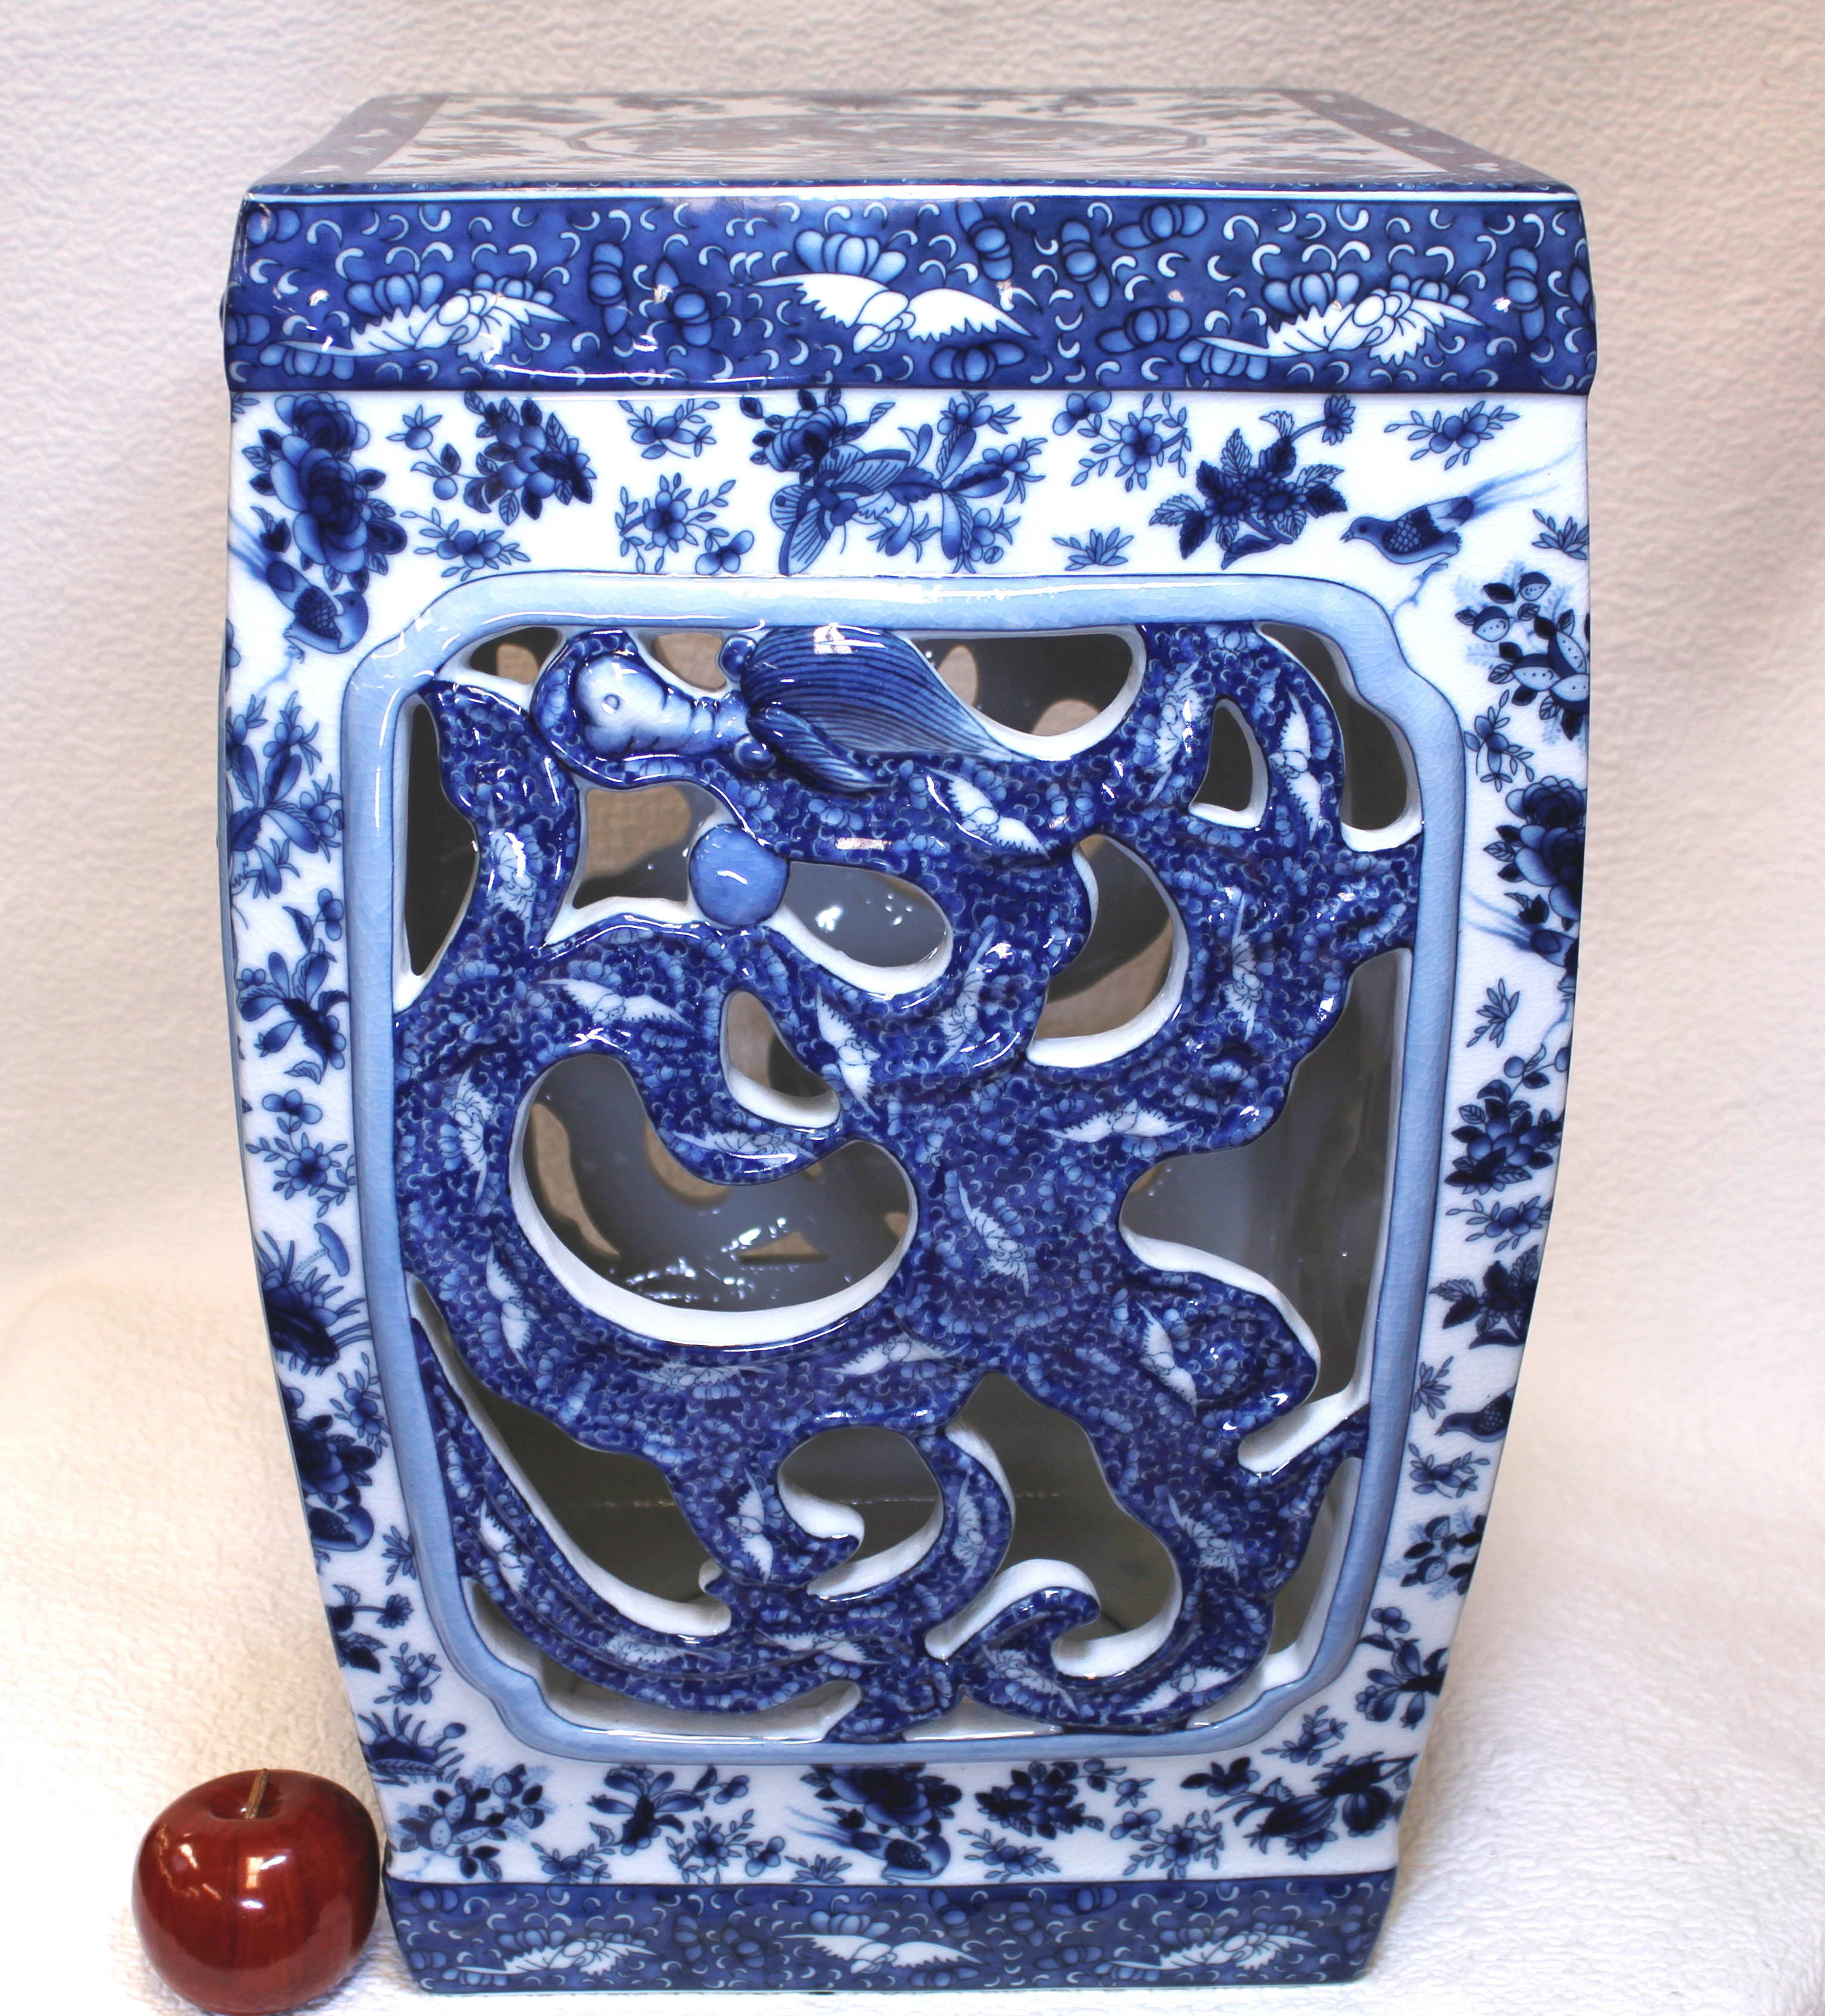 21 Lovable Blue and White Jars and Vases 2023 free download blue and white jars and vases of blue and white dragon porcelain garden seat 22 within a beautiful and unusual chinese porcelain garden seat painted with blue dragon cut outs this beautiful 